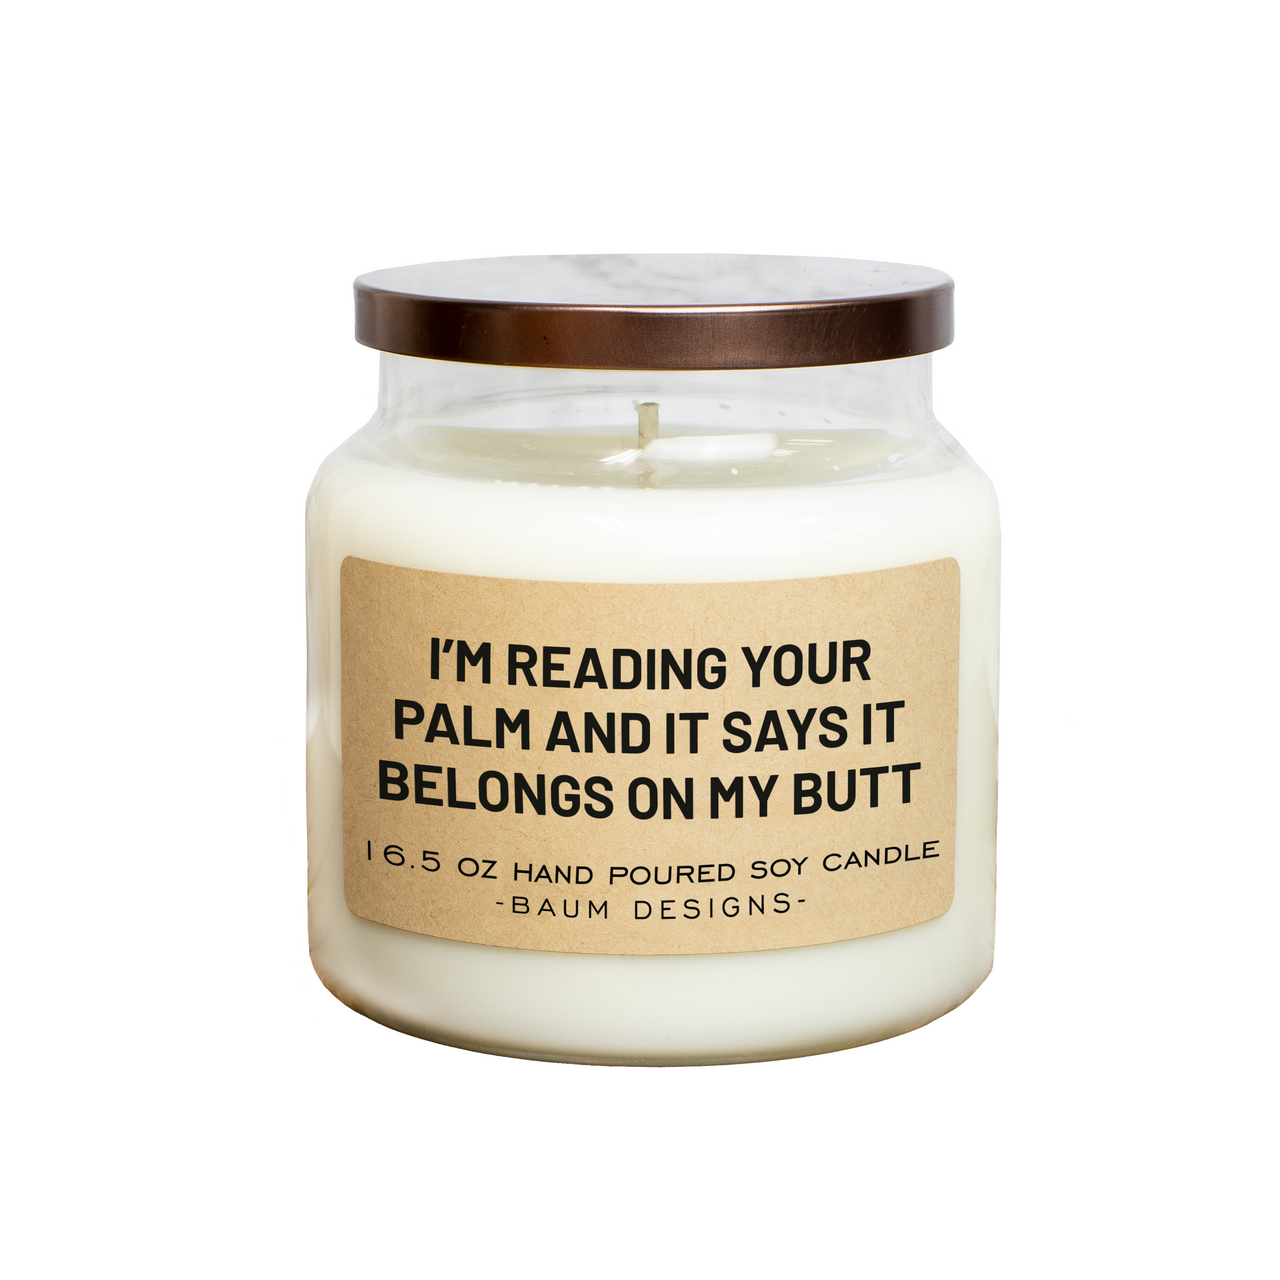 I'm Reading Your Palm And It Says It Belongs On My Butt Soy Candle Baum Designs